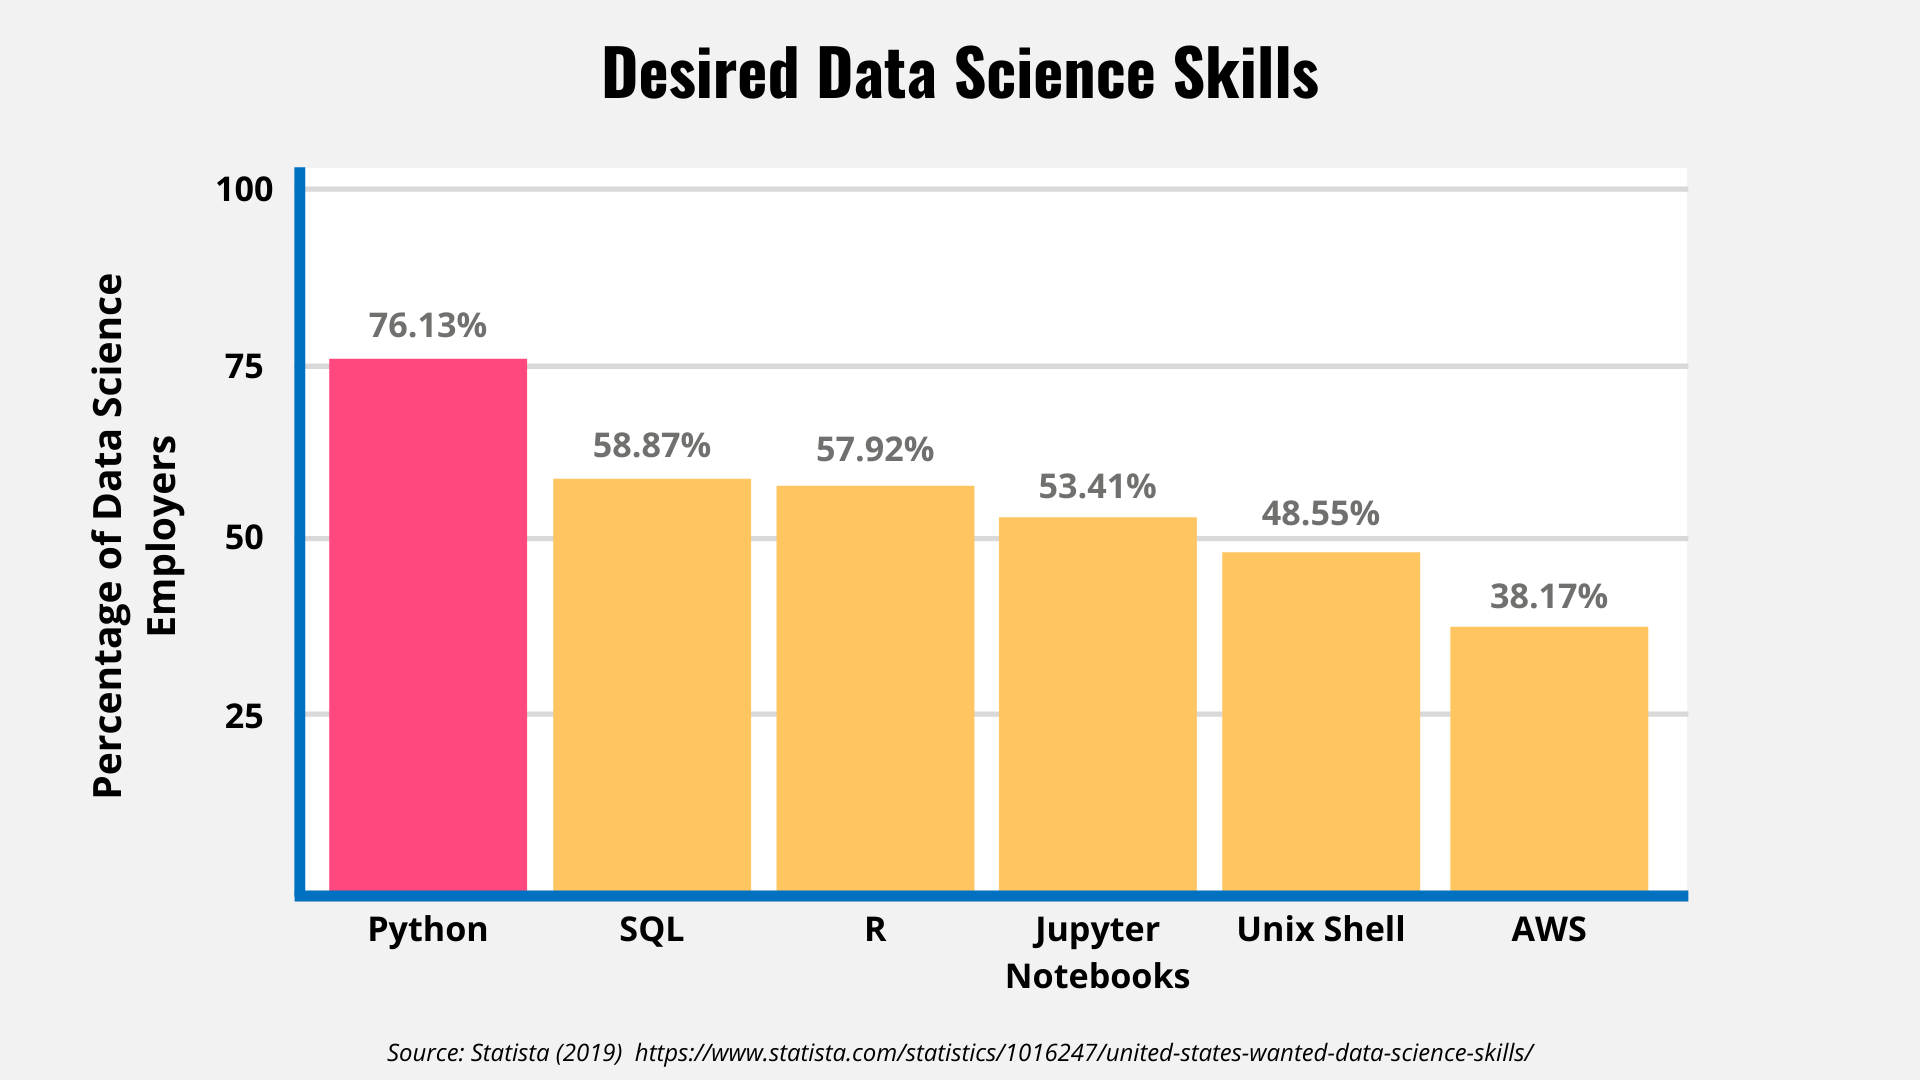 Bar graph showing Data Science requested skills